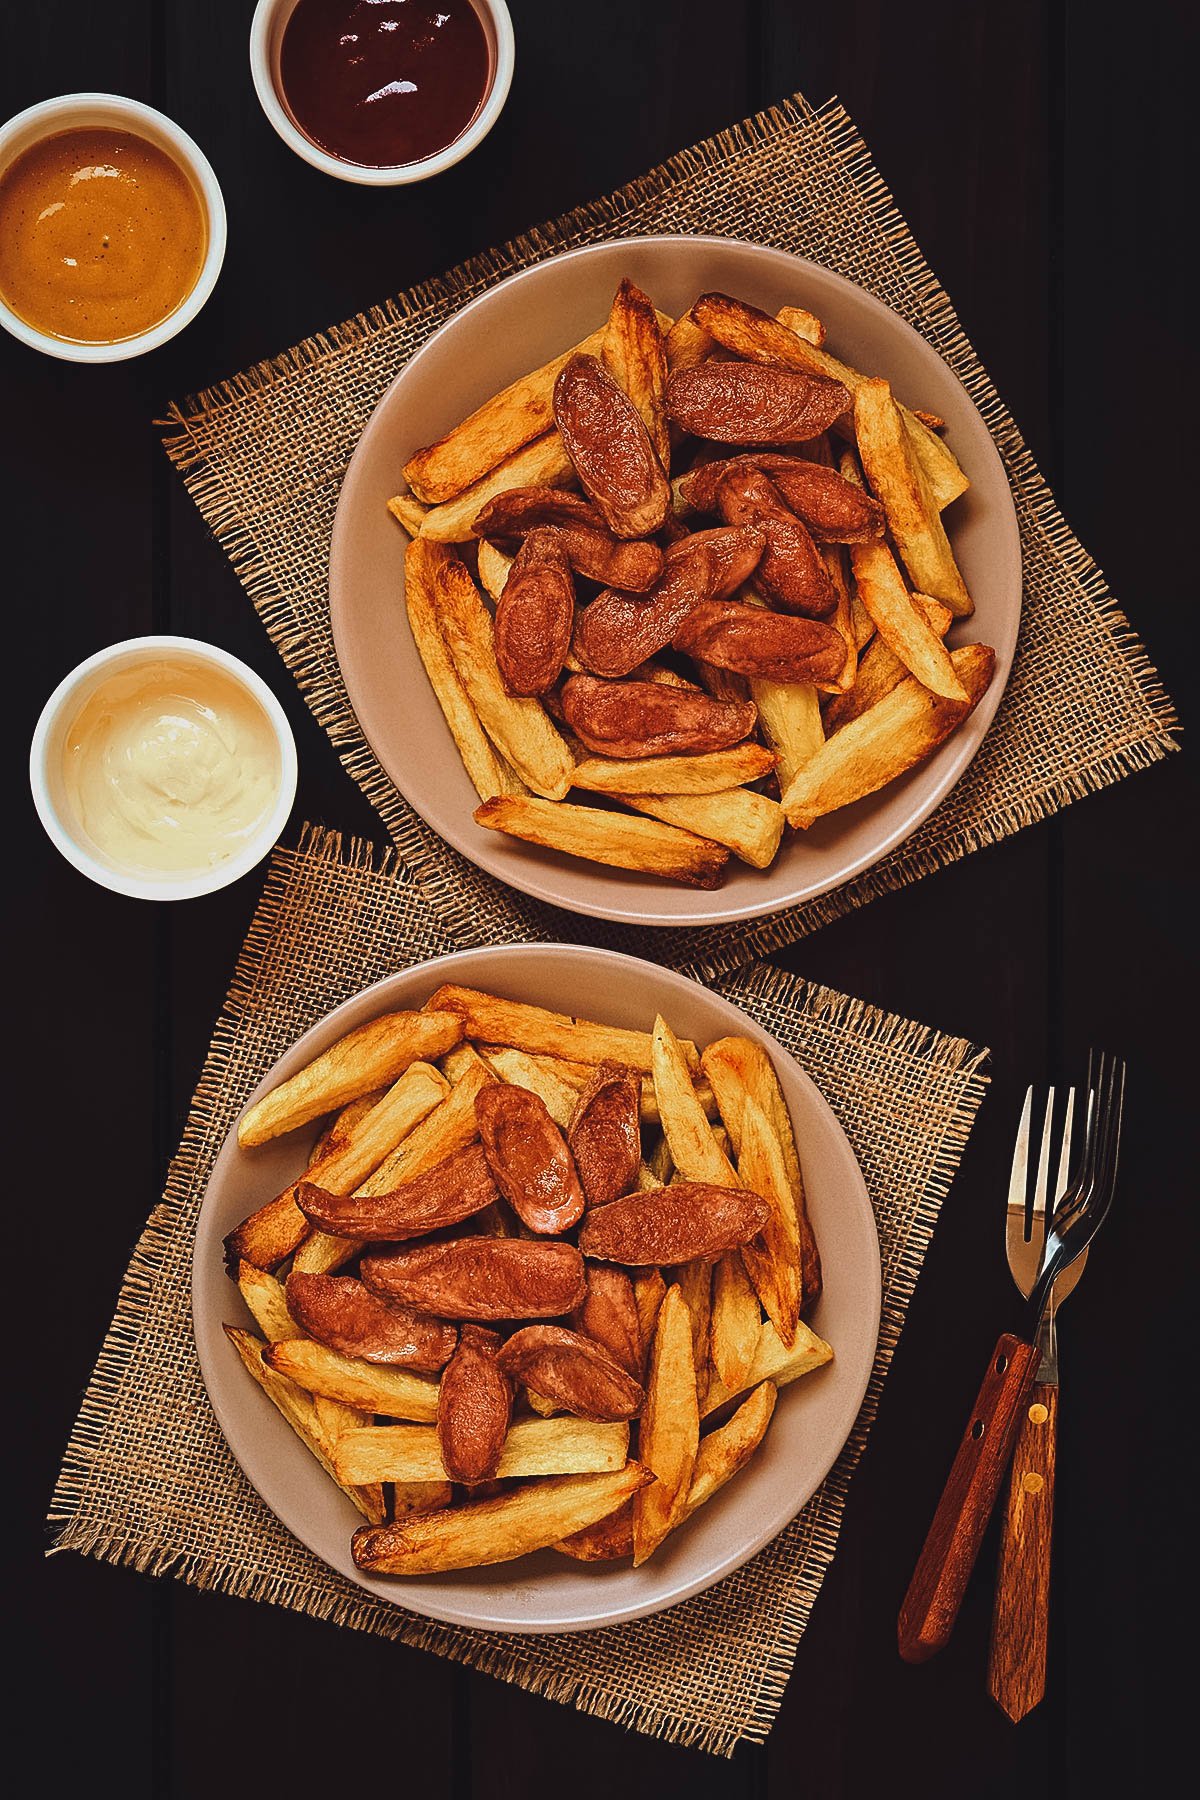 Plates of salchipapas, a popular street food dish made with sausages and french fries